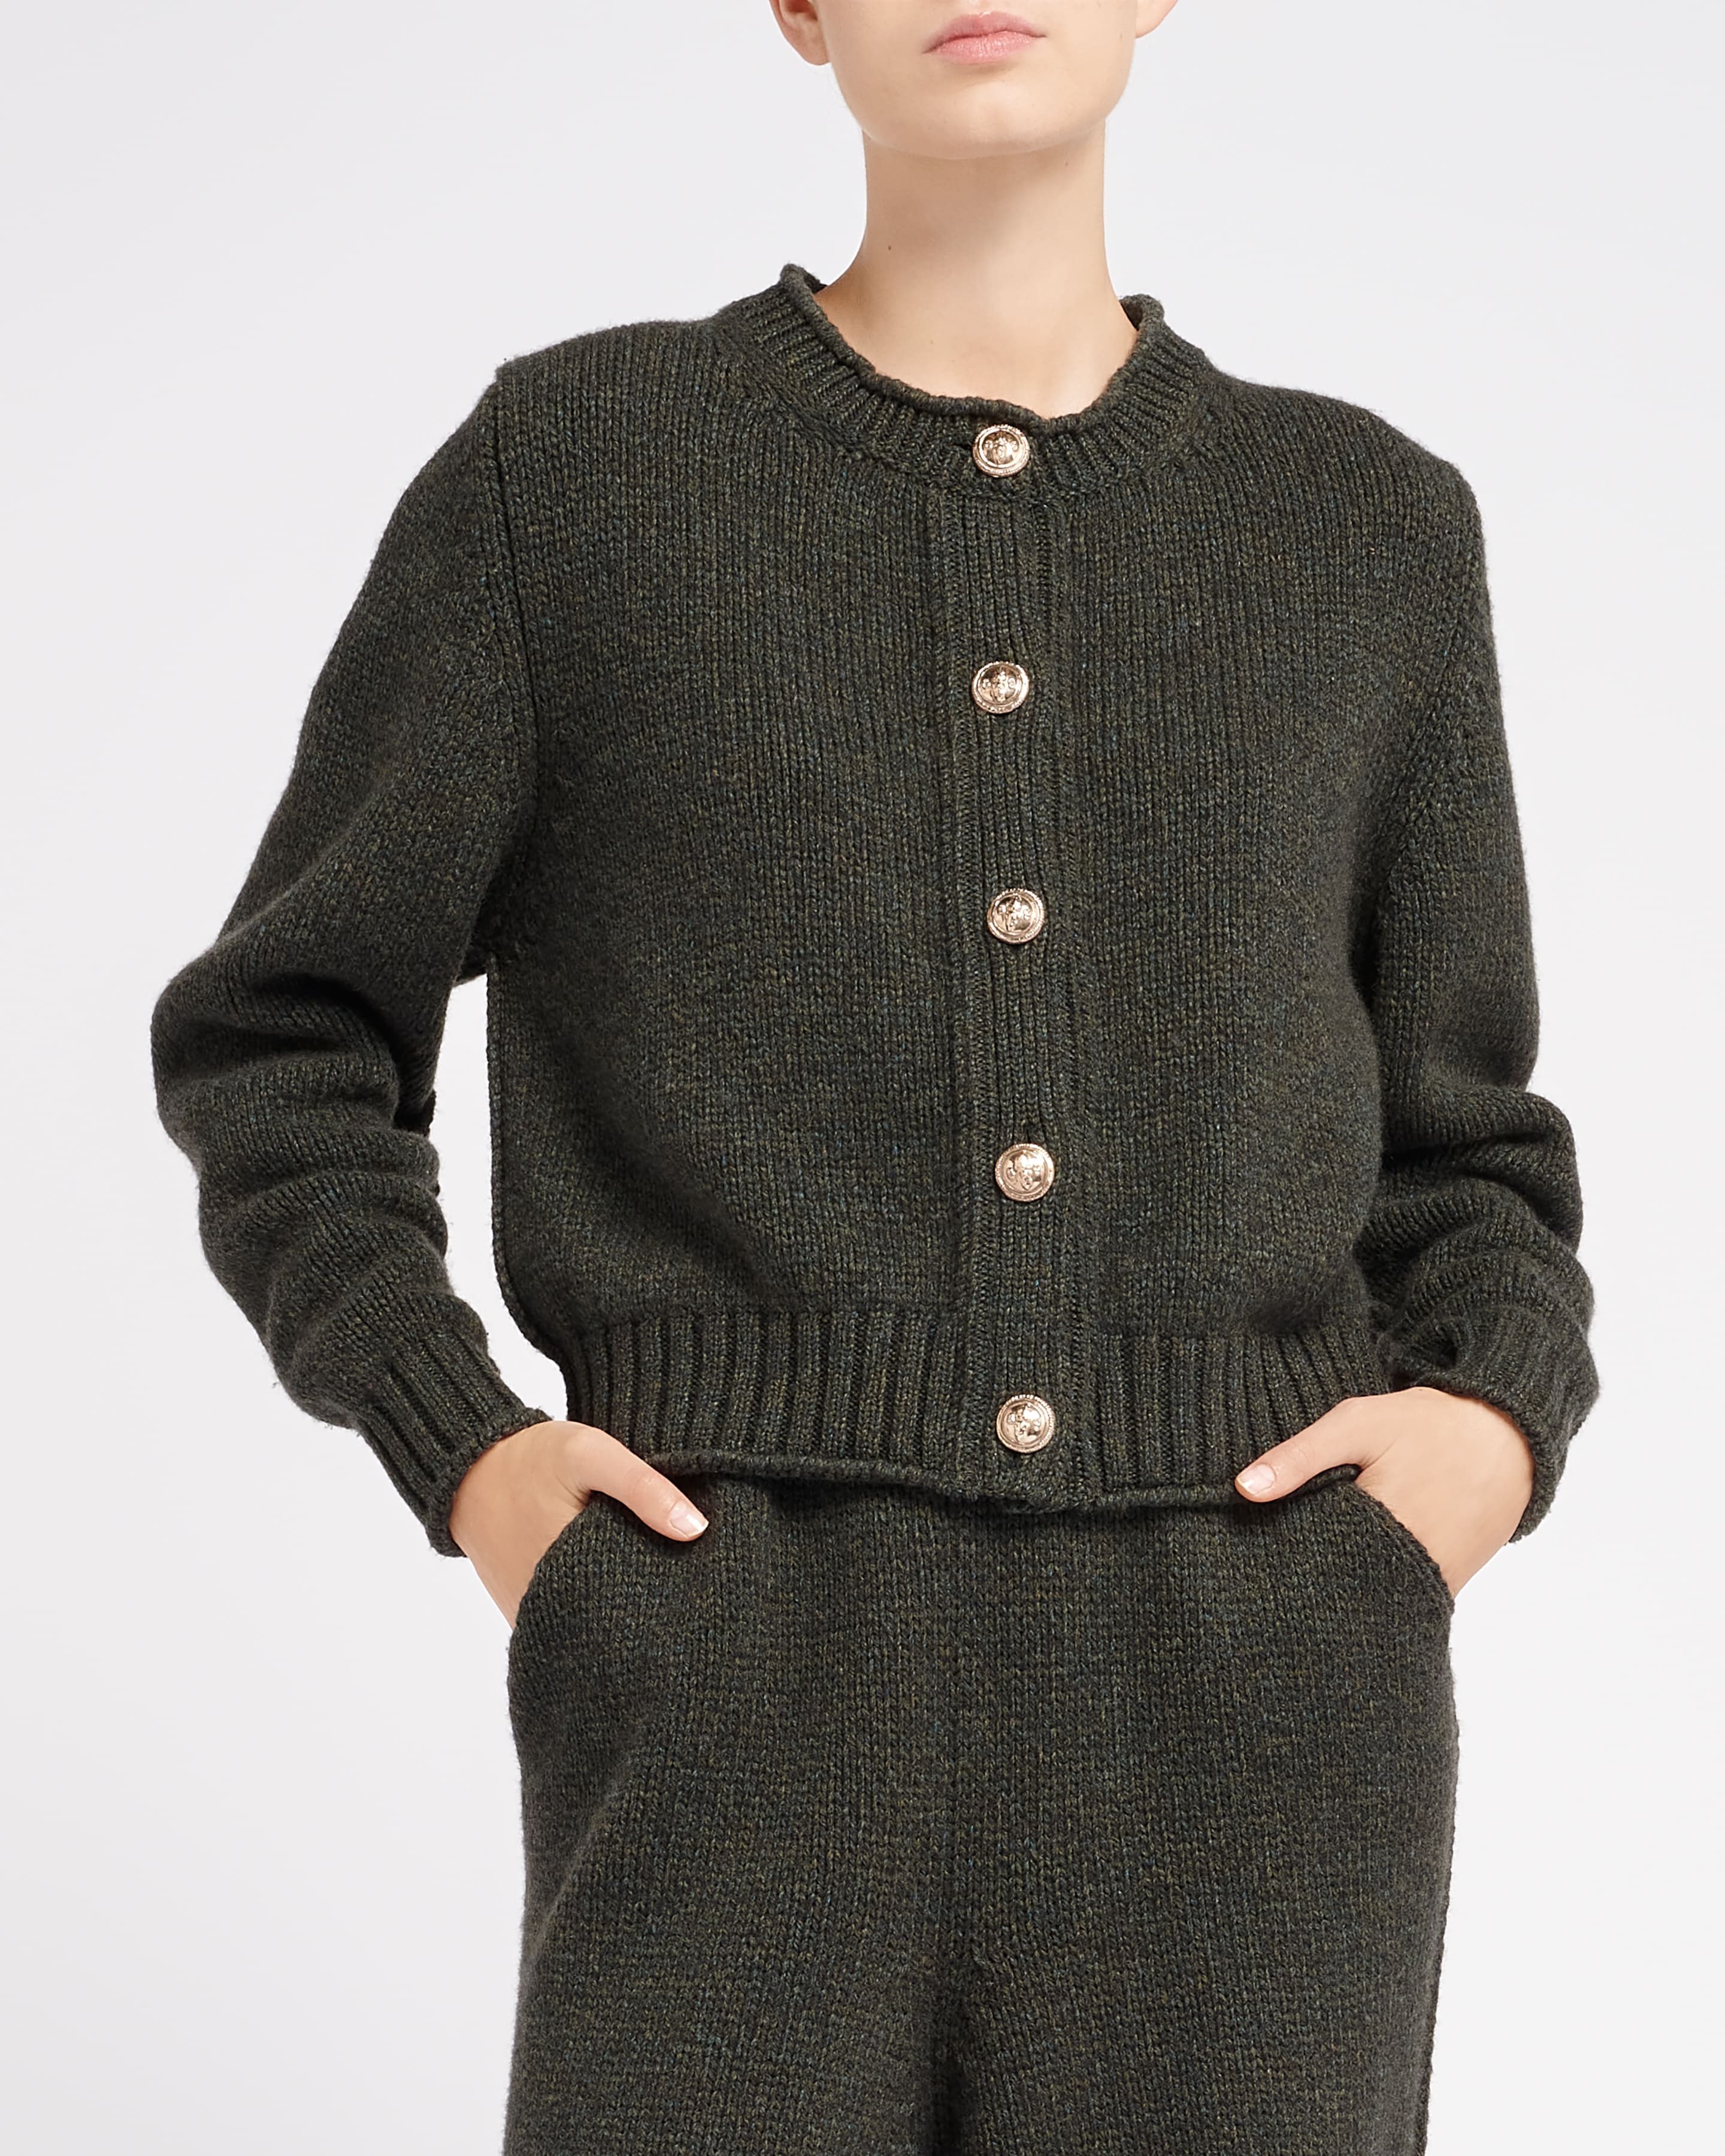 Cardigan in chunky cashmere with gold buttons – Barrie.com